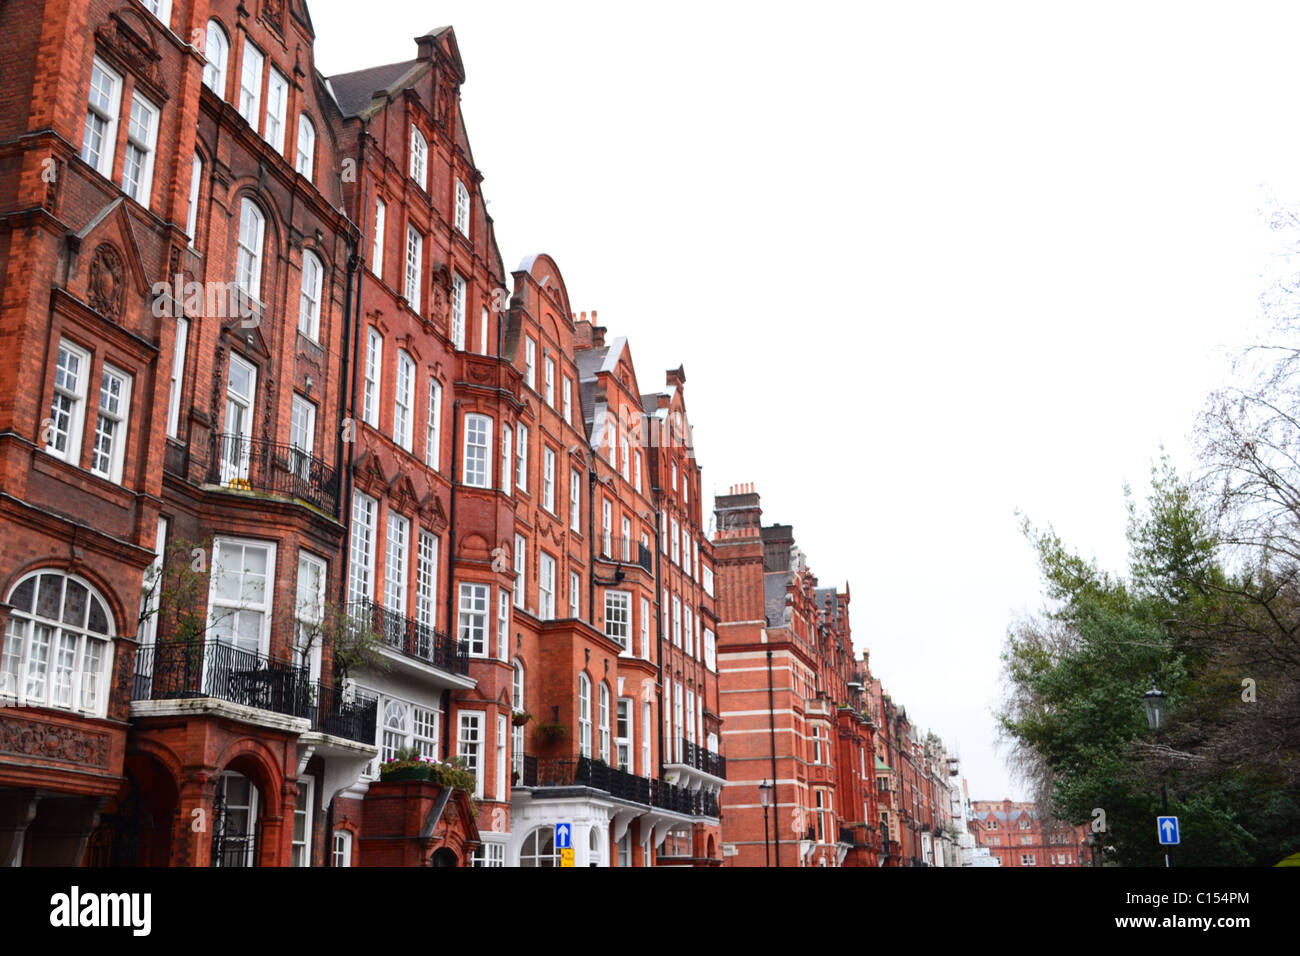 Homes of the Wealthy: Red Brick Houses in Cadogan Square, Knightsbridge Chelsea Area, London, United Kingdom. Stock Photo